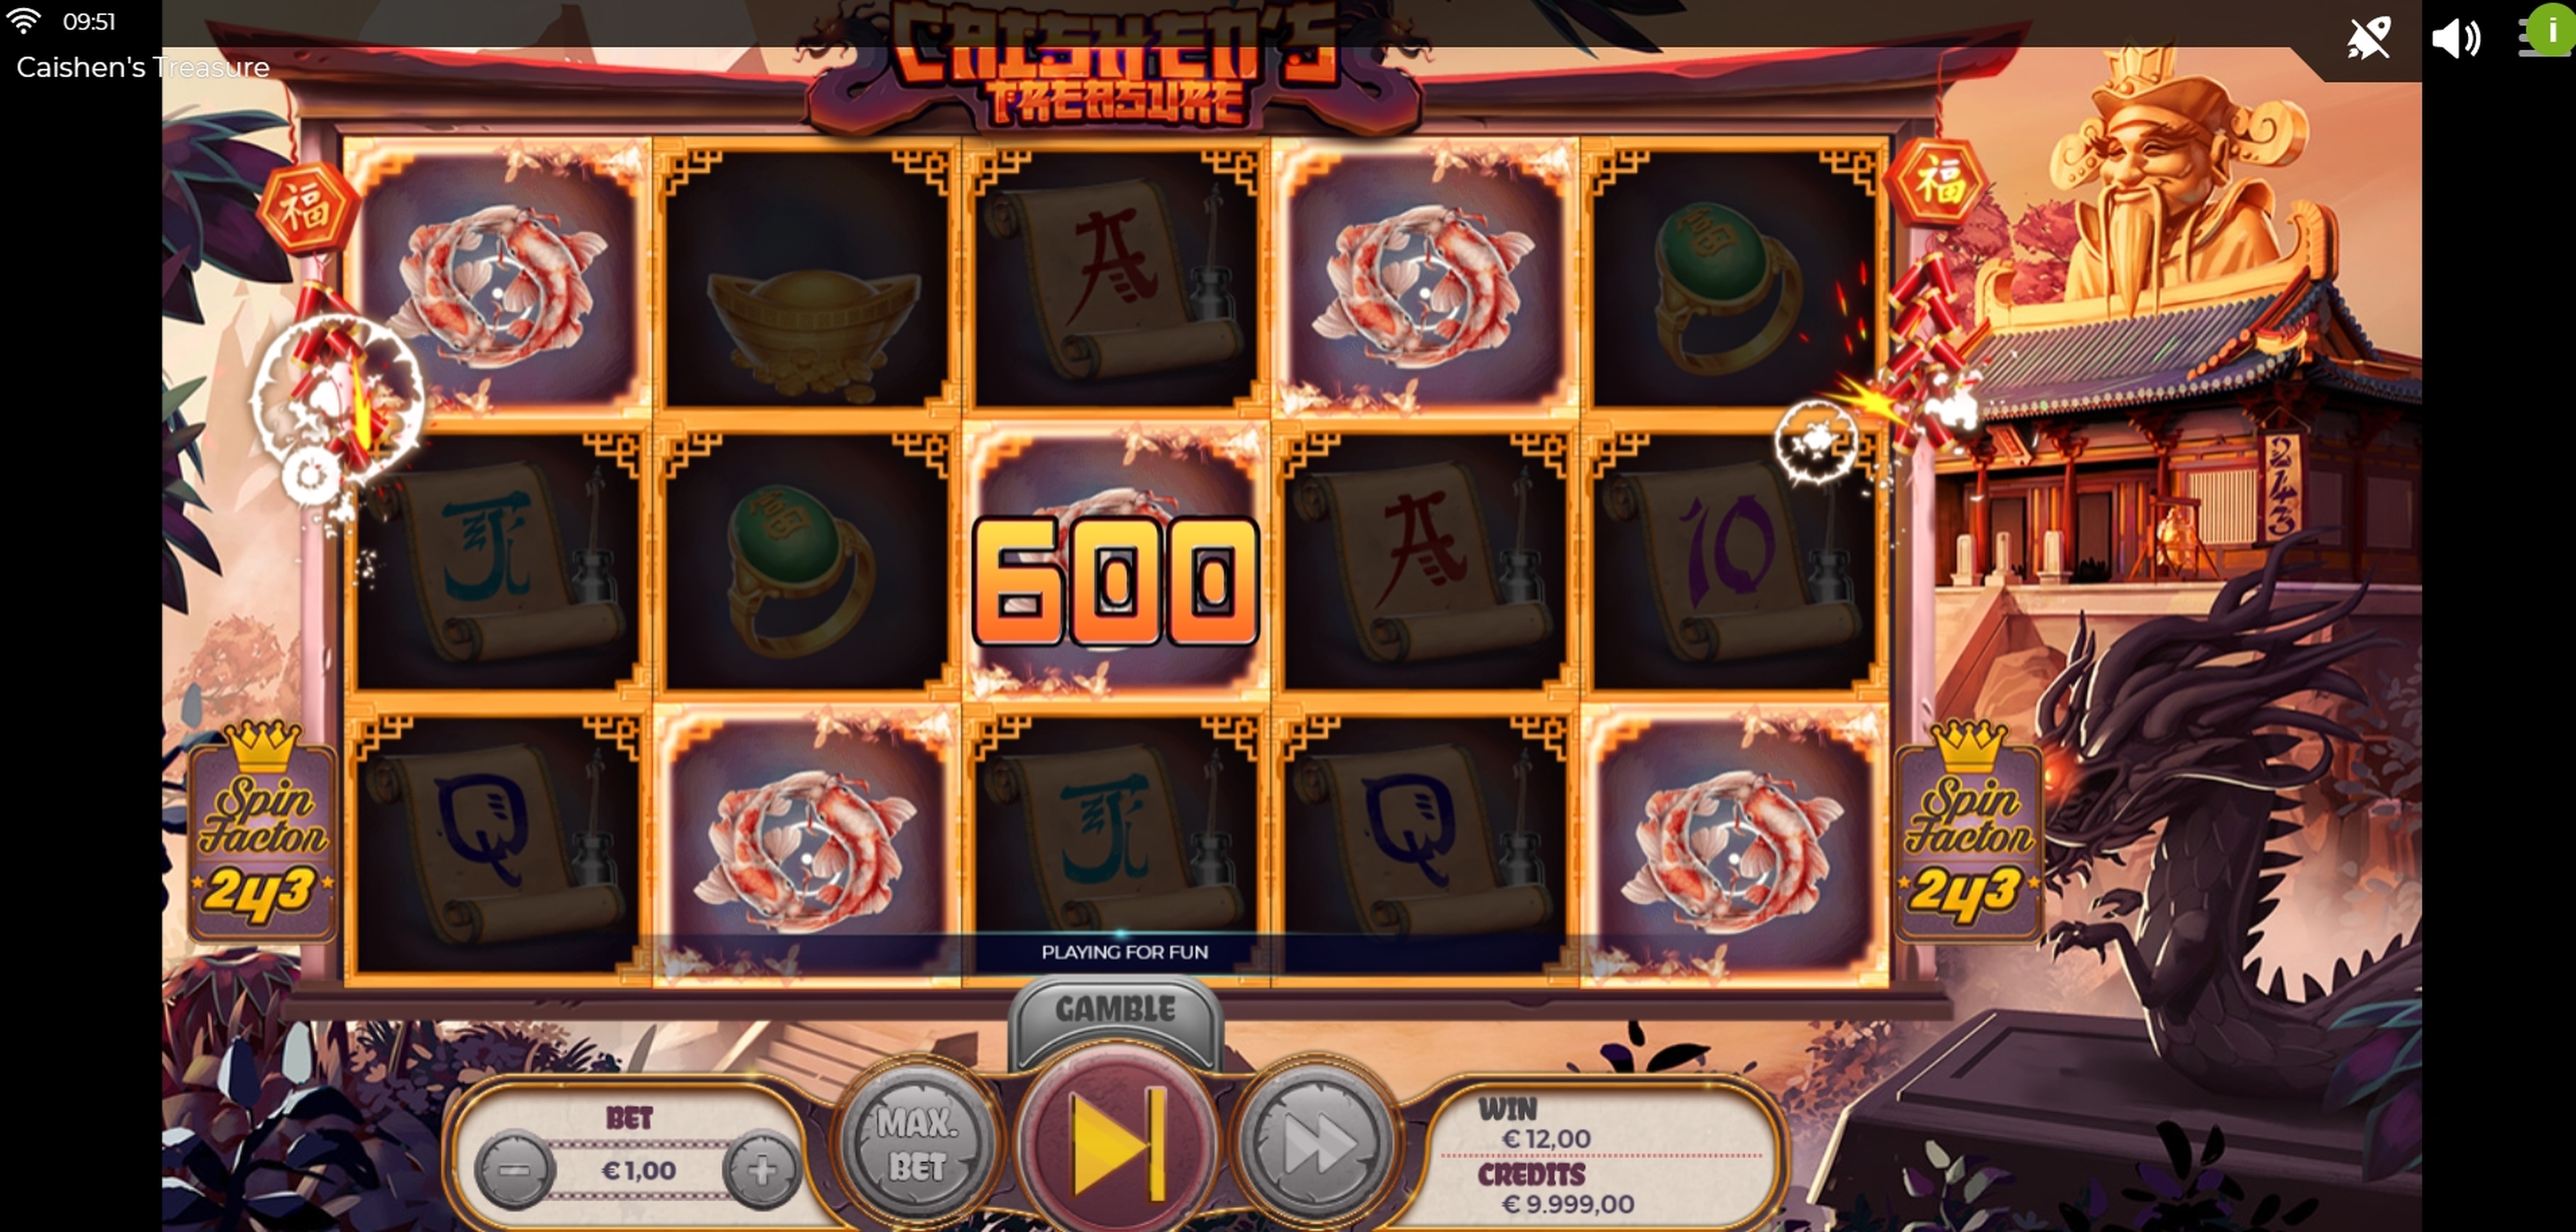 Win Money in Caishen's Treasure Free Slot Game by Spinmatic